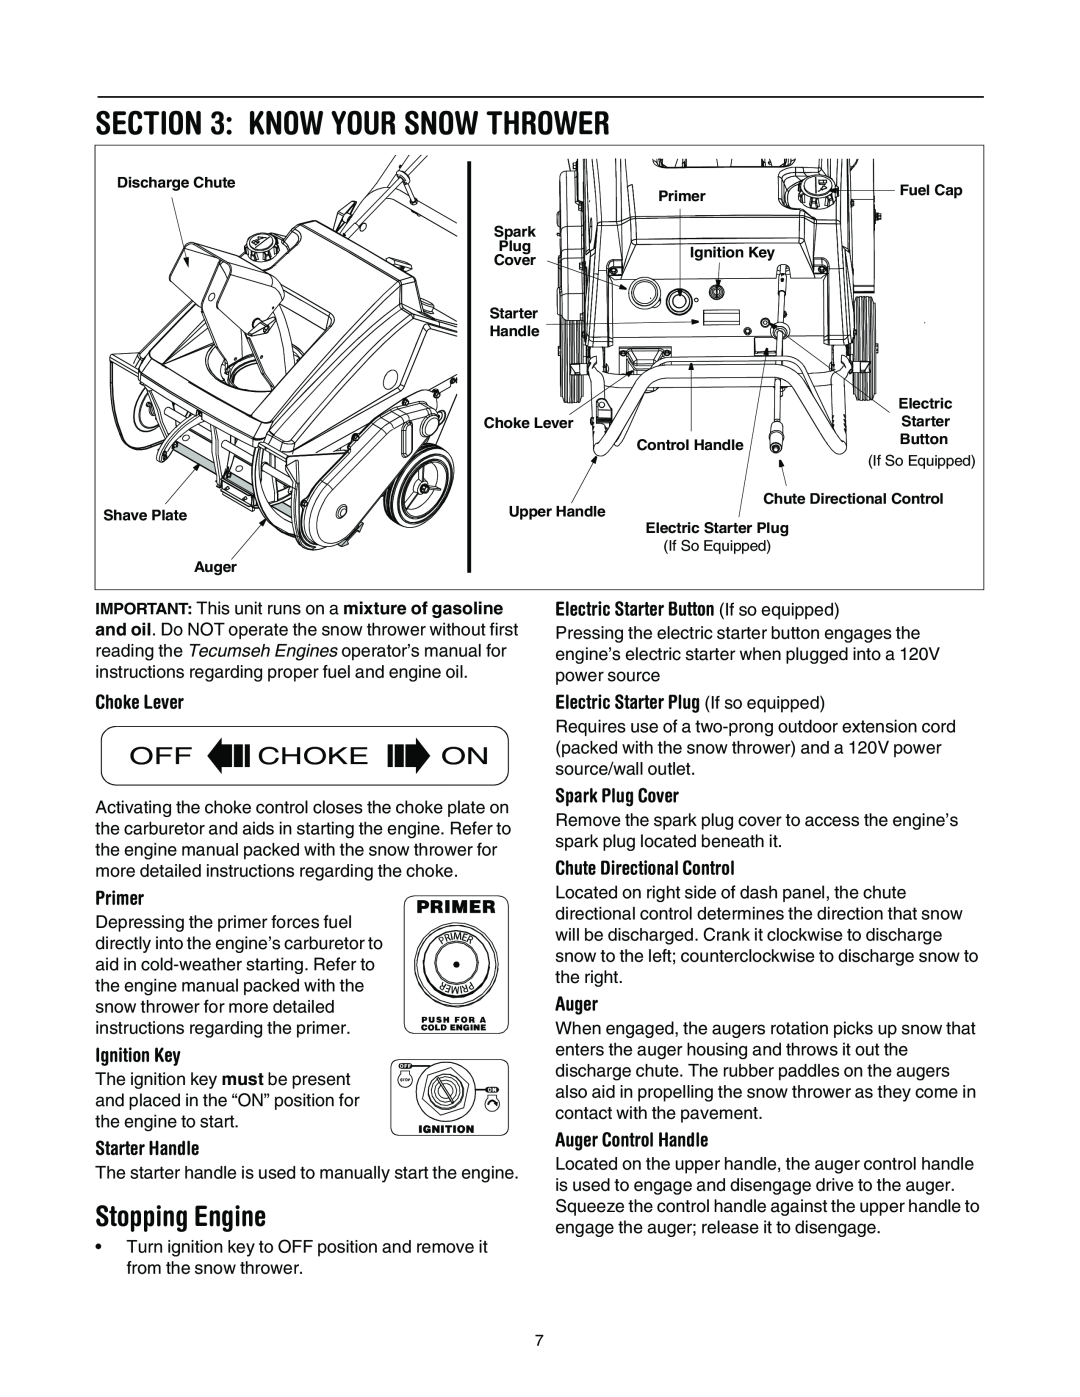 MTD E172, E162, E150, 140 manual Know Your Snow Thrower, Stopping Engine, Off Choke On 